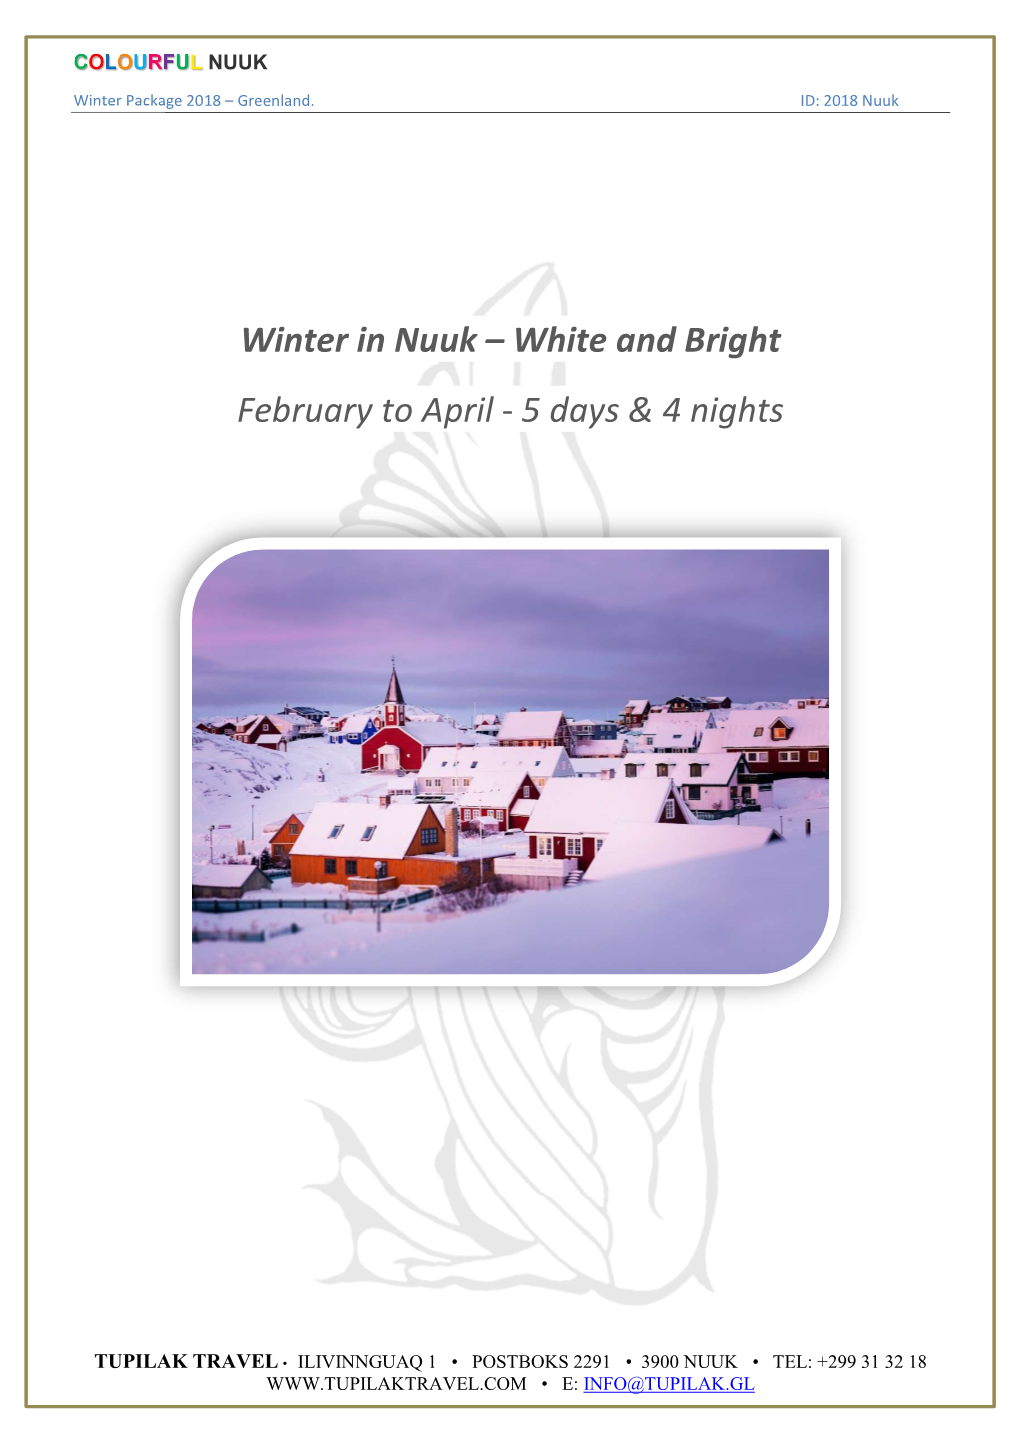 Winter in Nuuk – White and Bright February to April - 5 Days & 4 Nights